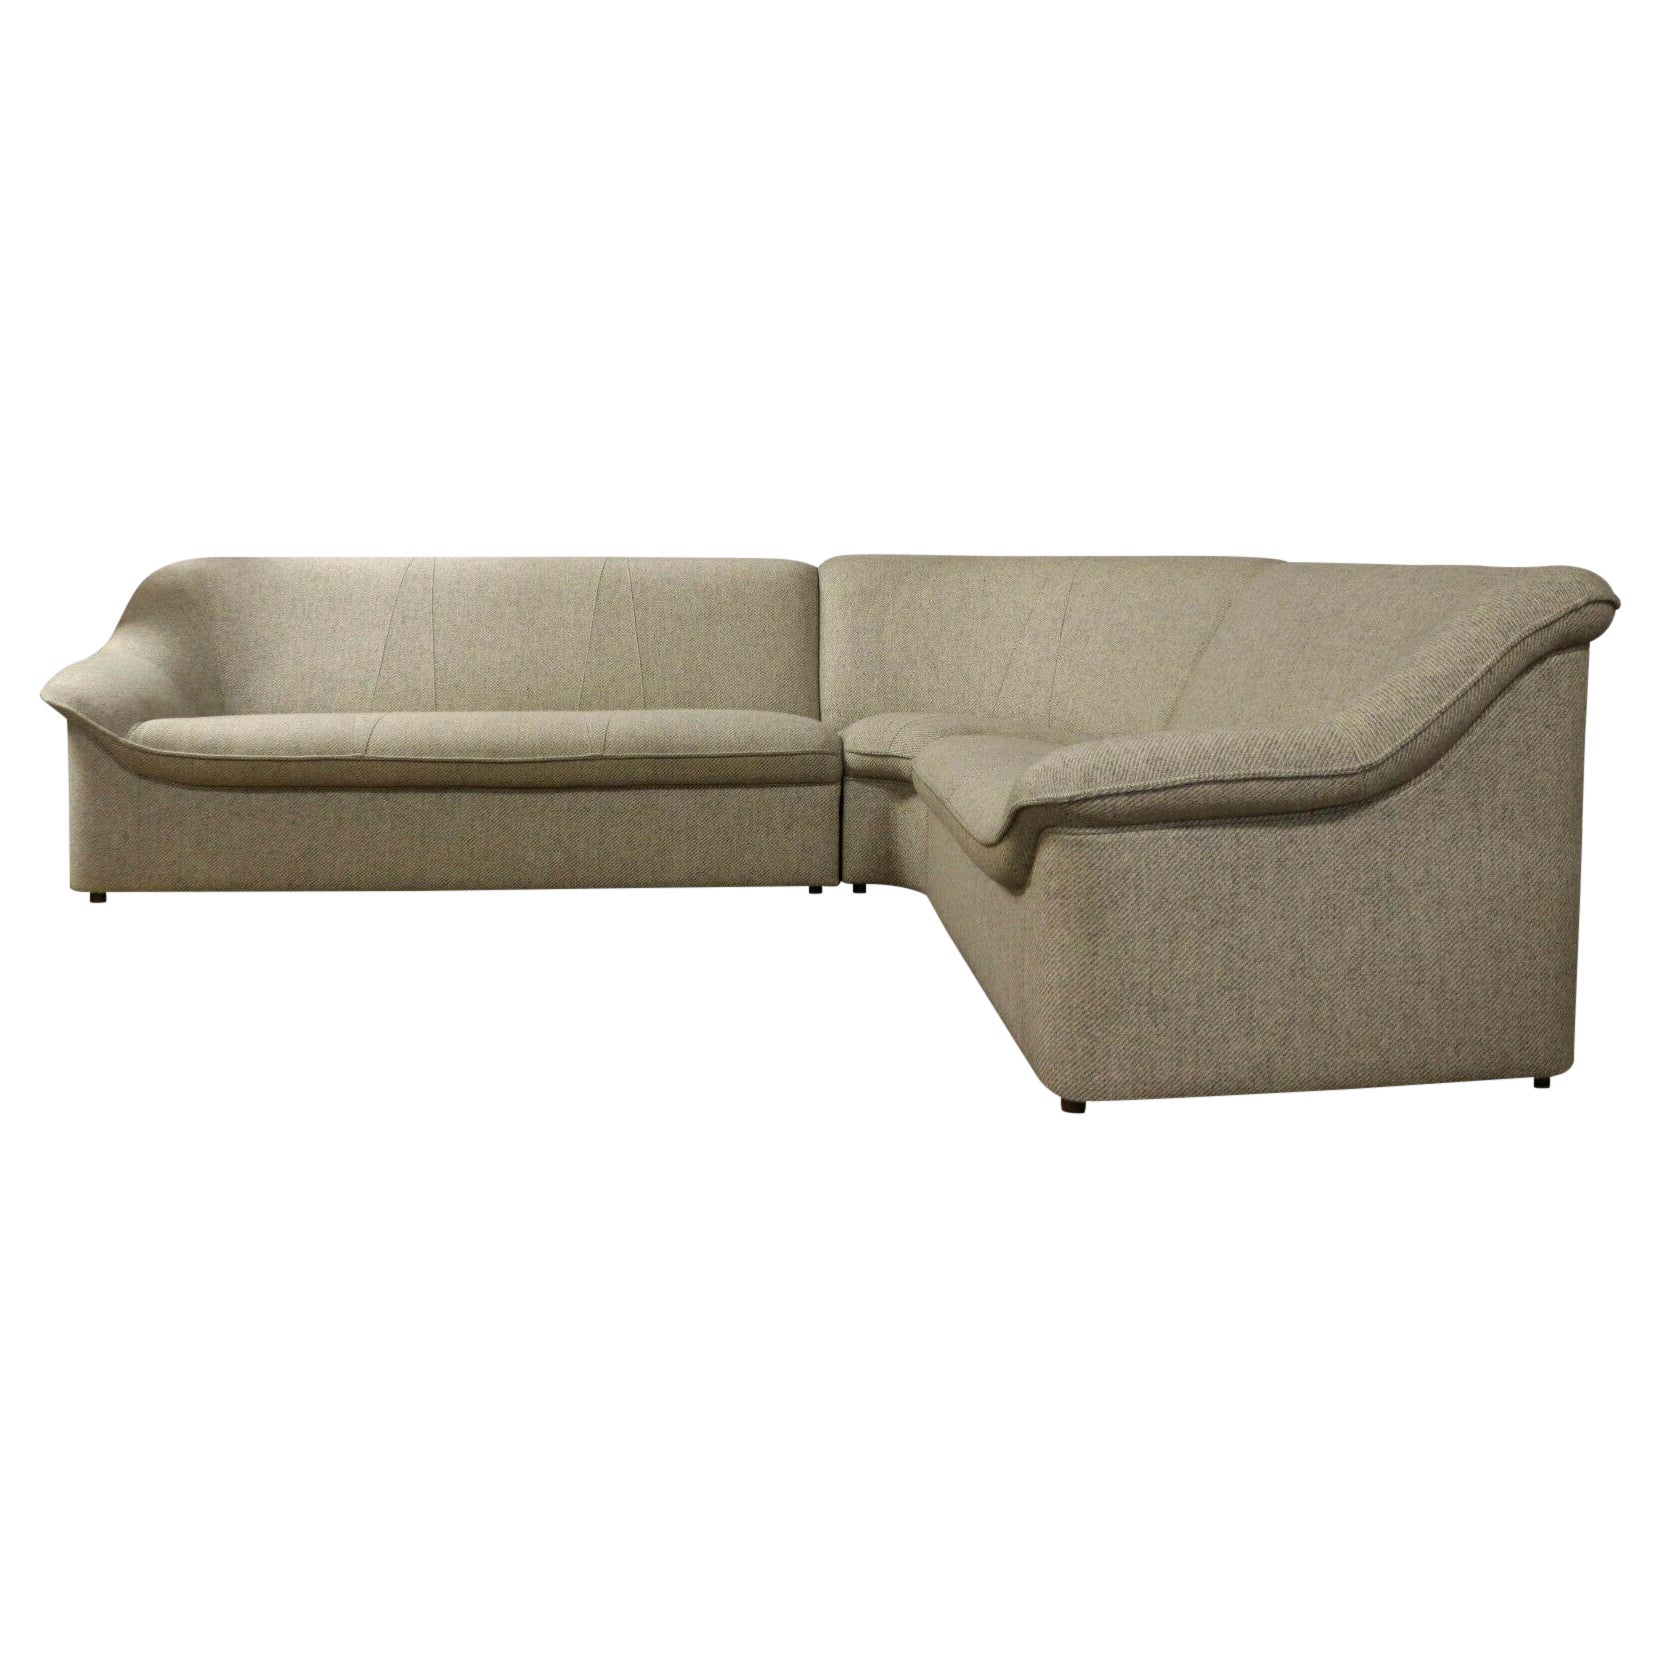 Stunning 3-piece sectional sofa by Bramin Mobler, formerly known as N. A. Jorgensen is well known for making iconic Danish furniture of the highest quality. This sofa features a modern twill, neutral upholstery in very good condition with stitch